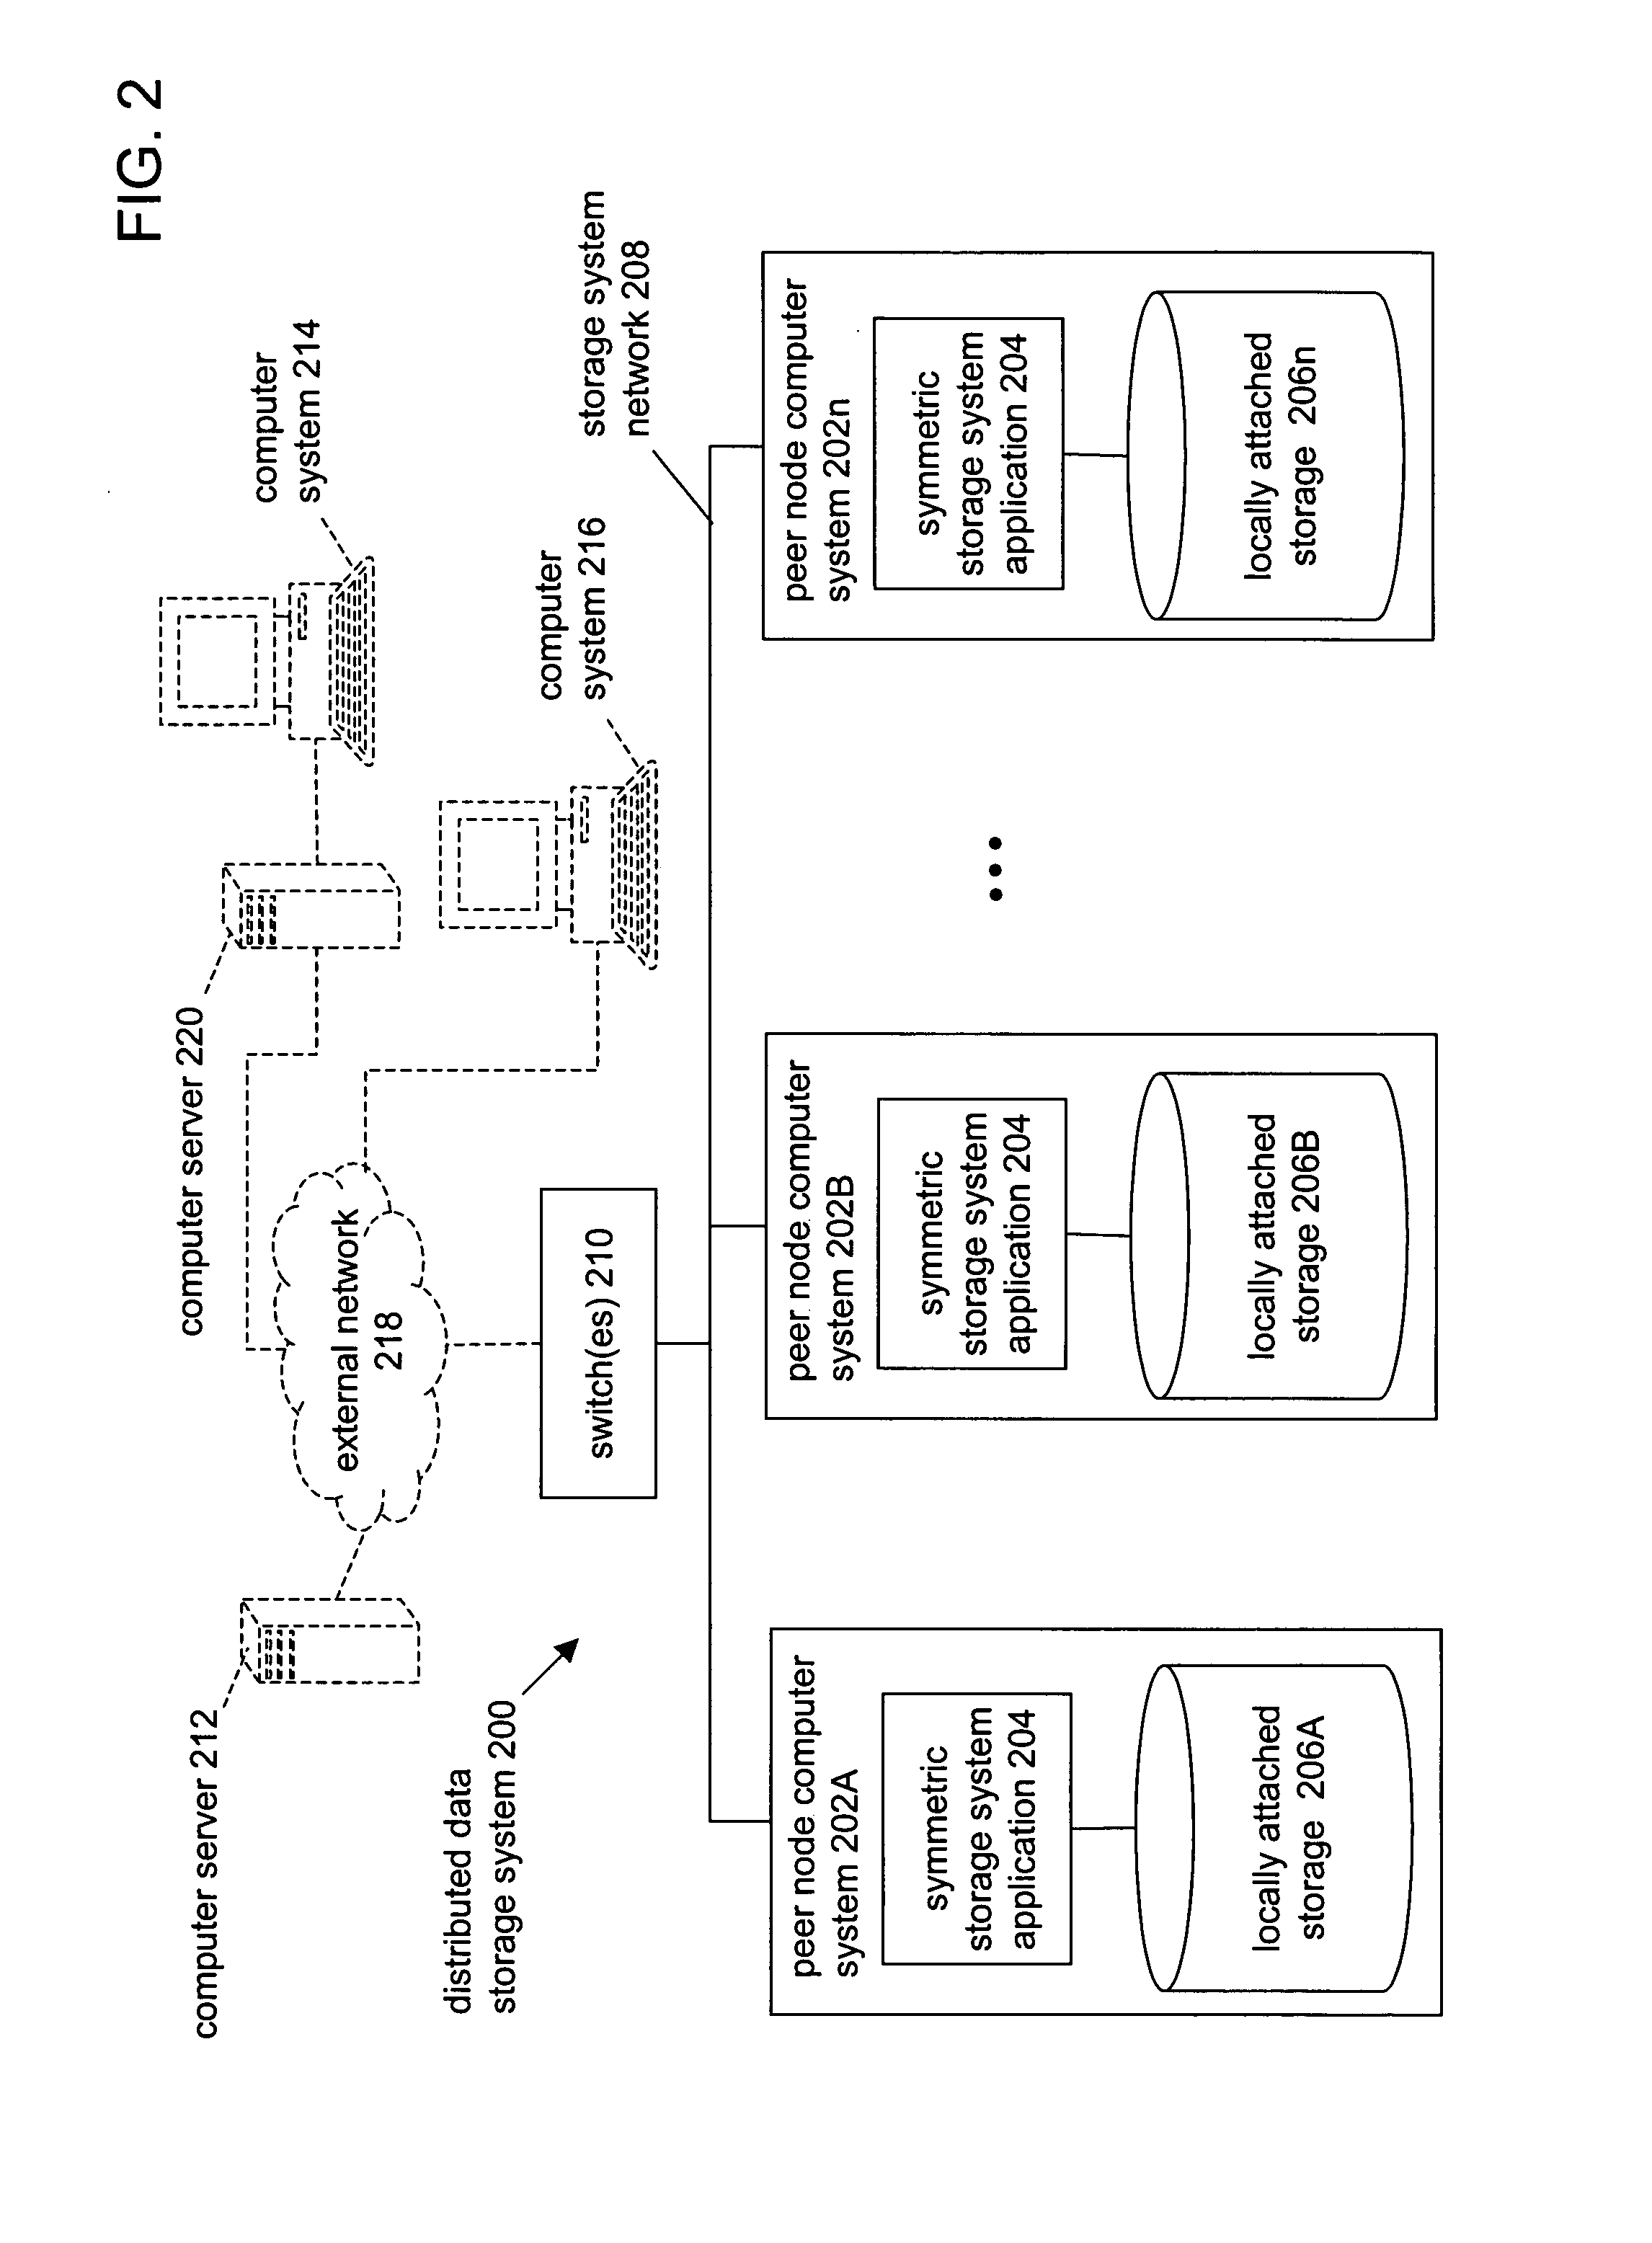 Method of garbage collection on a data storage system